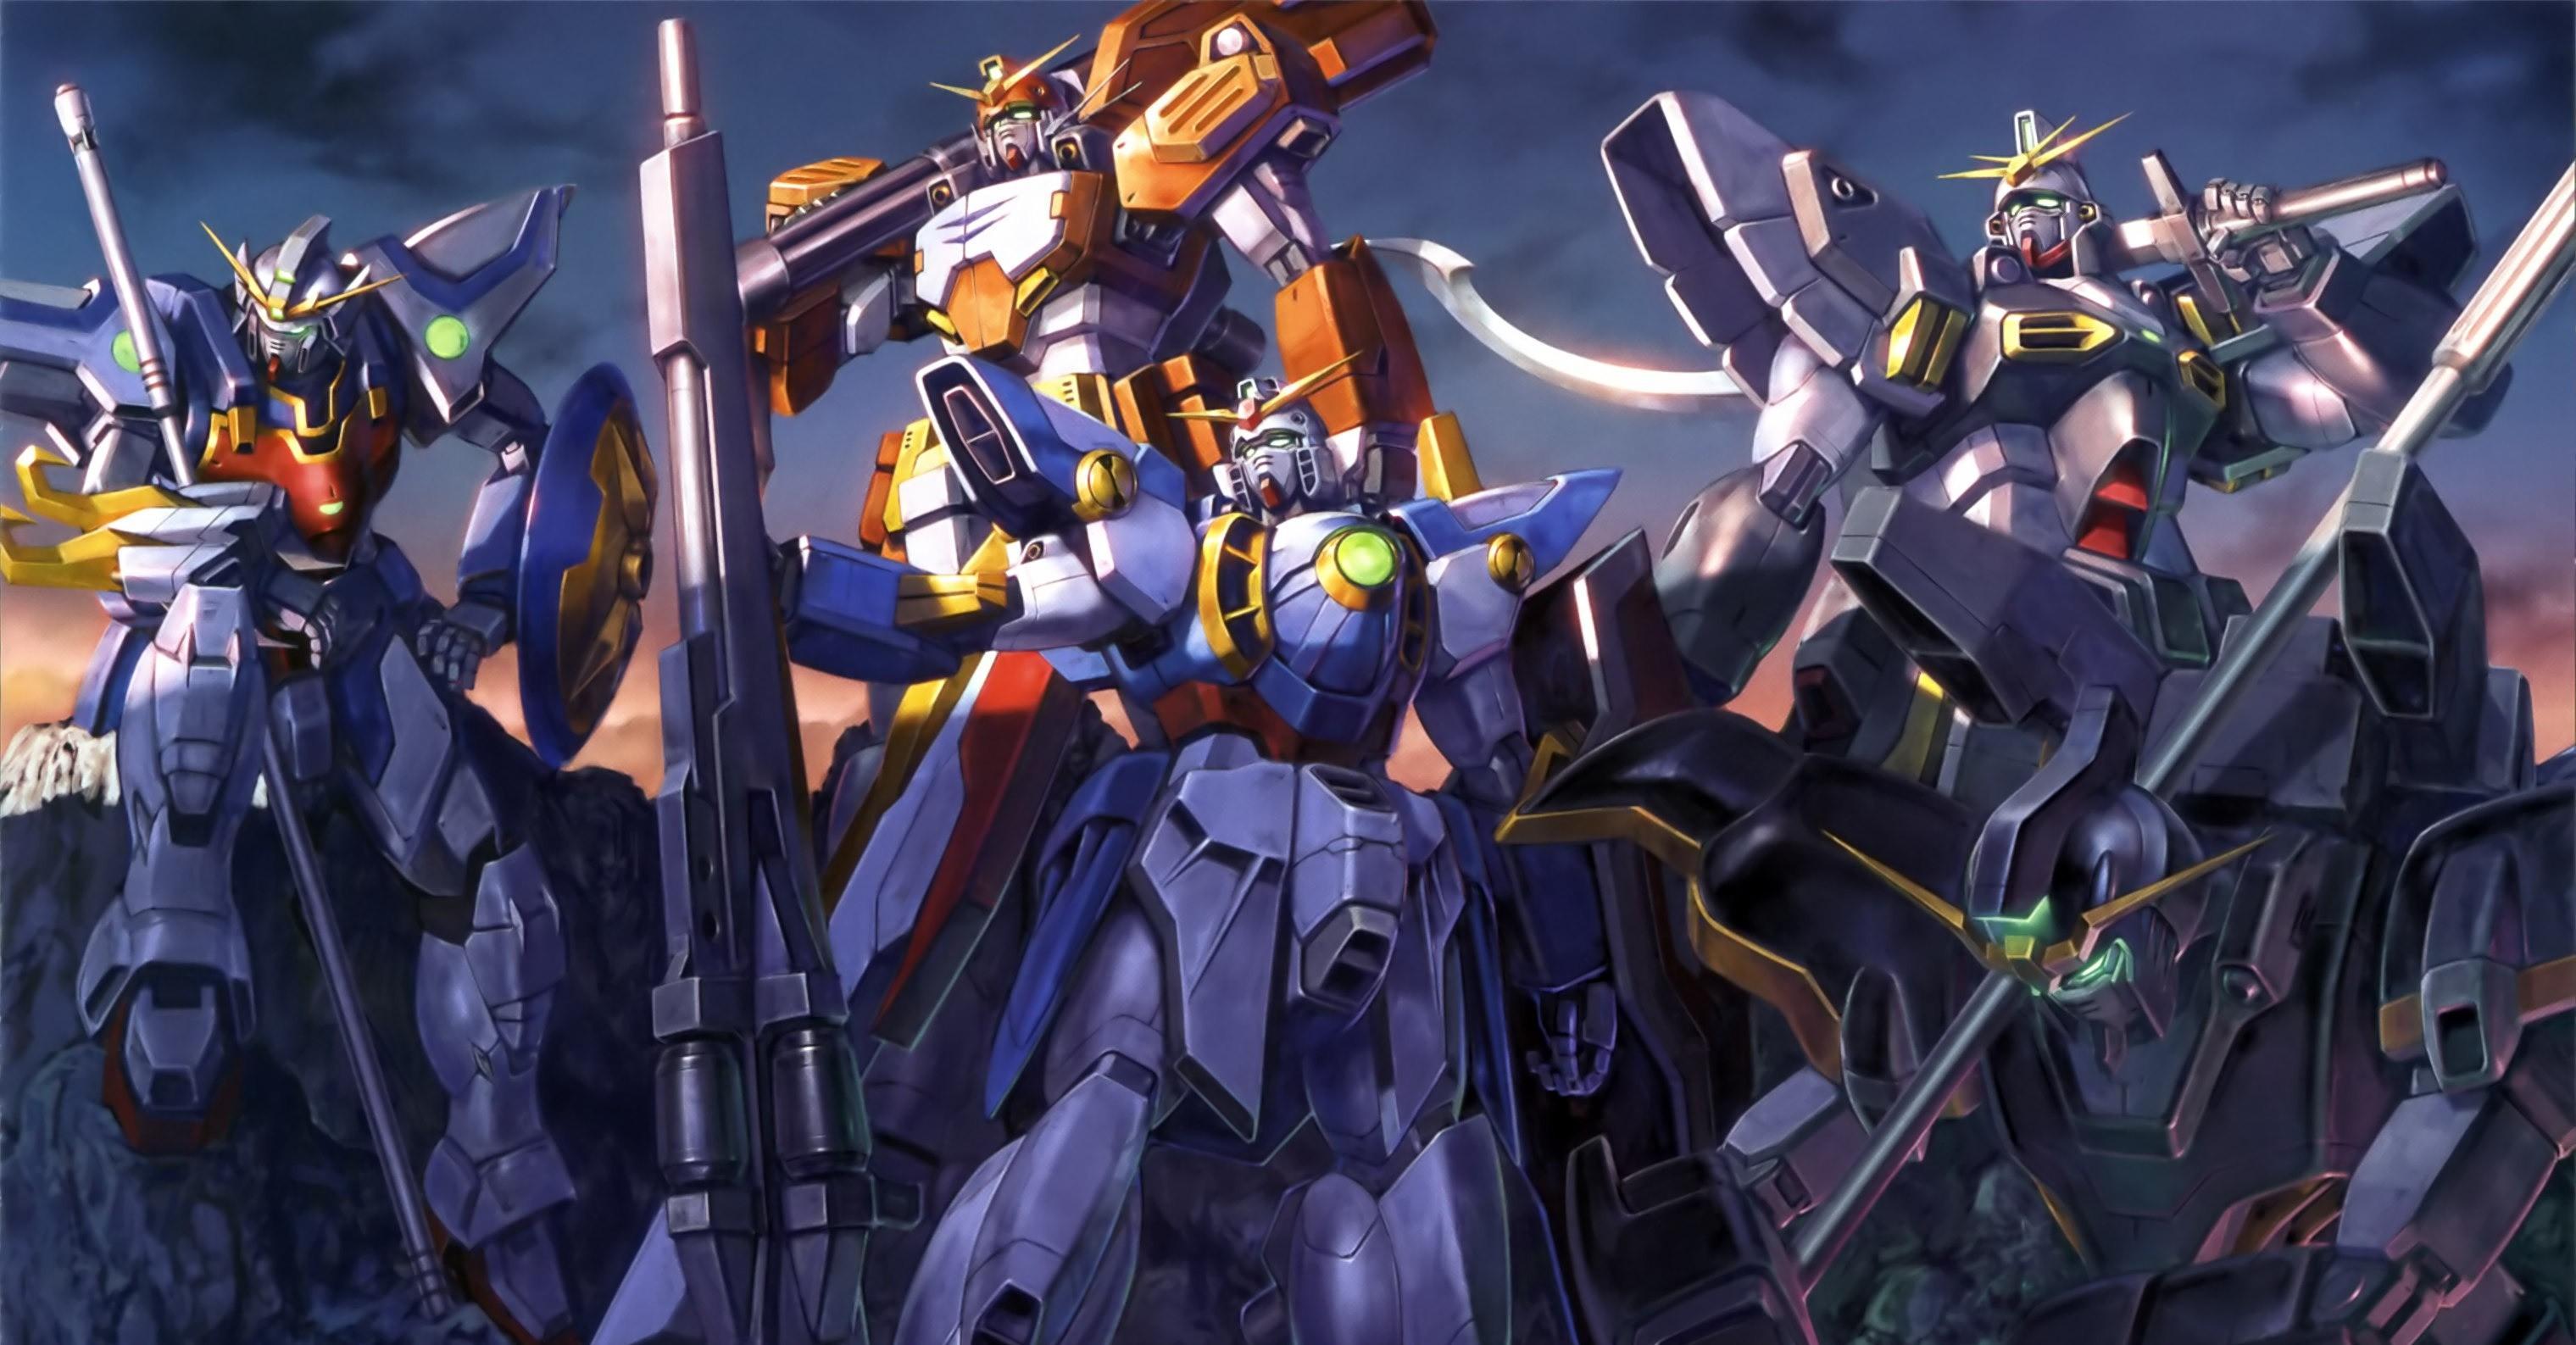  Gundam  HD  Wallpaper  for Android  APK Download